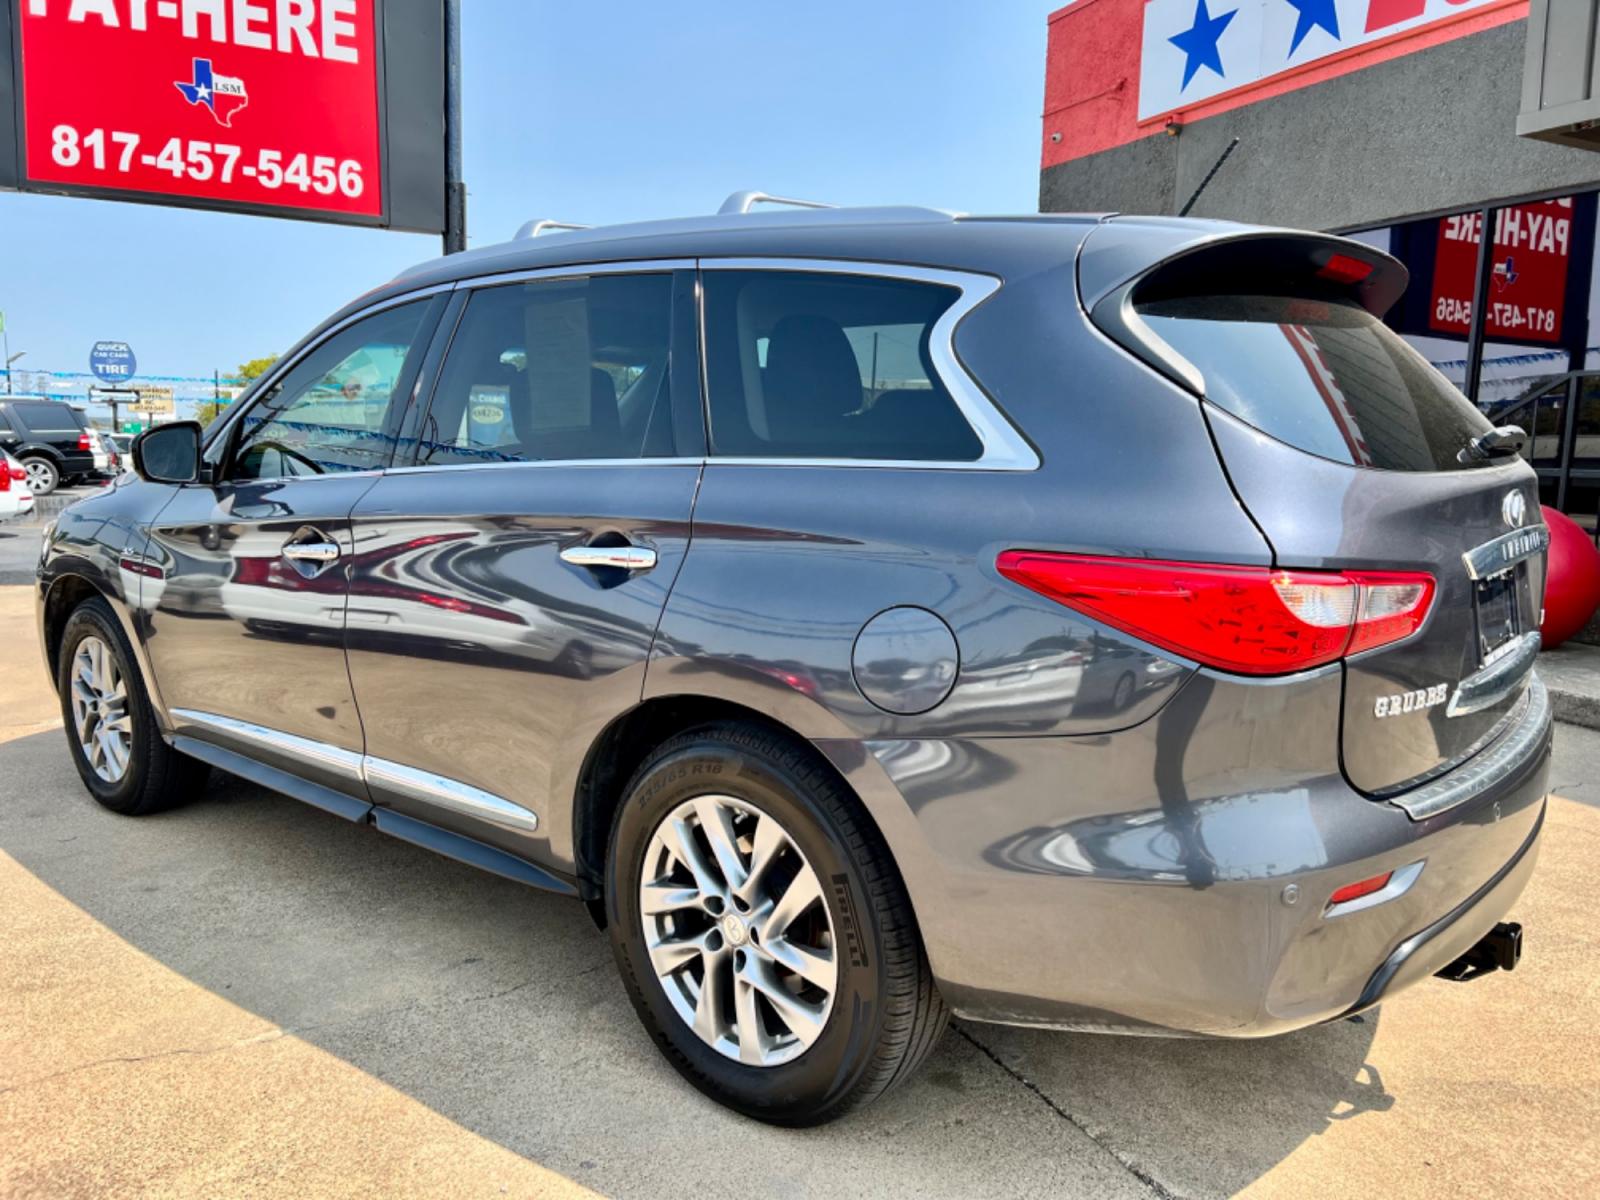 2014 GRAY INFINITI QX60 (5N1AL0MN1EC) , located at 5900 E. Lancaster Ave., Fort Worth, TX, 76112, (817) 457-5456, 0.000000, 0.000000 - This is a 2014 INFINITI QX60 4 DOOR SUV that is in excellent condition. There are no dents or scratches. The interior is clean with no rips or tears or stains. All power windows, door locks and seats. Ice cold AC for those hot Texas summer days. It is equipped with a CD player, AM/FM radio, AUX port - Photo #4